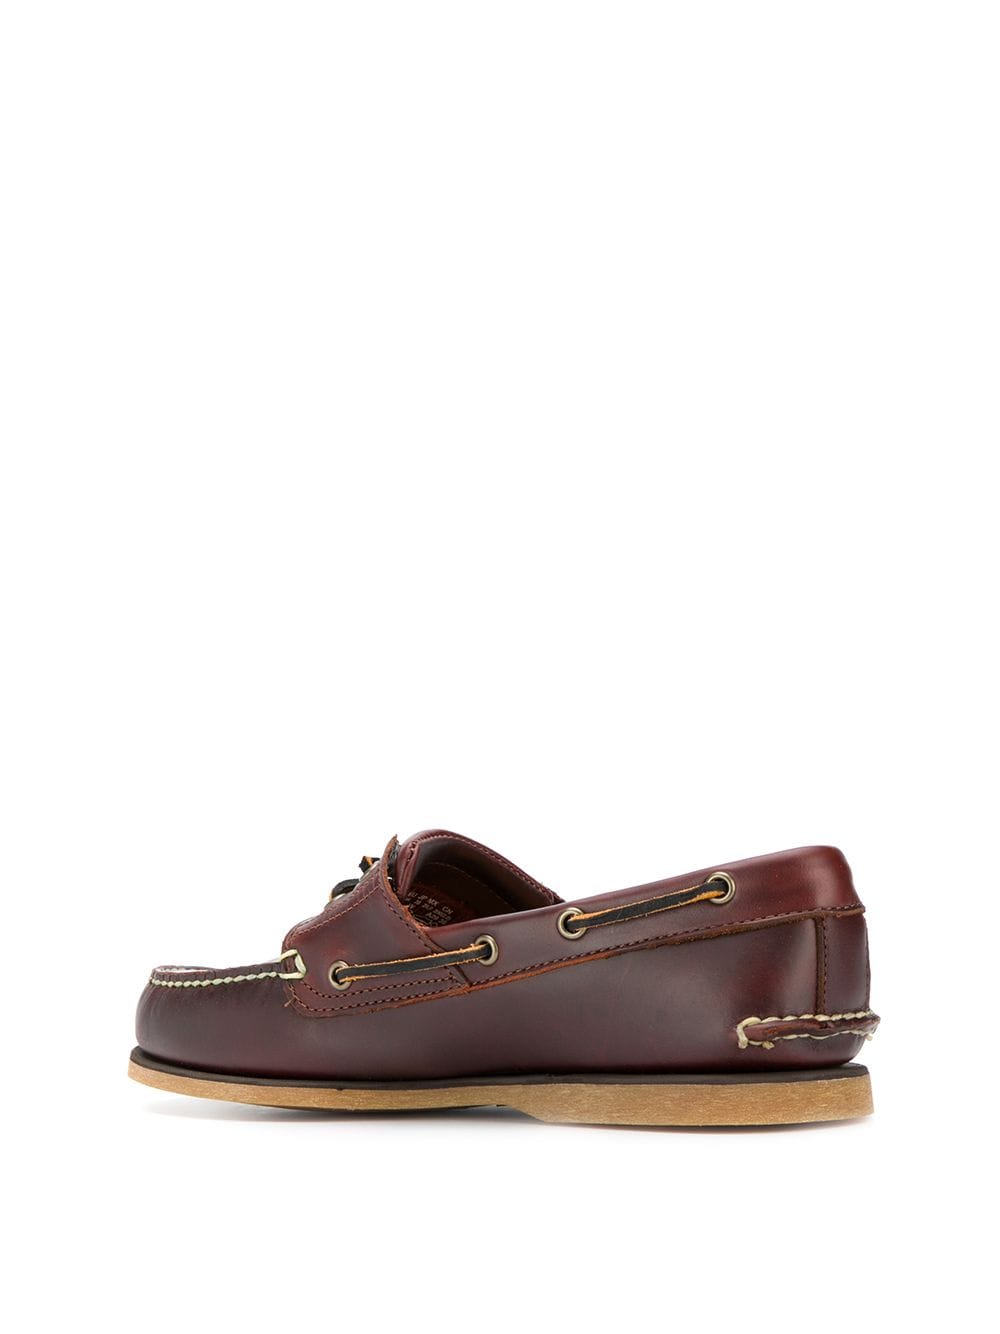 Brown leather and rubber classic boat shoes